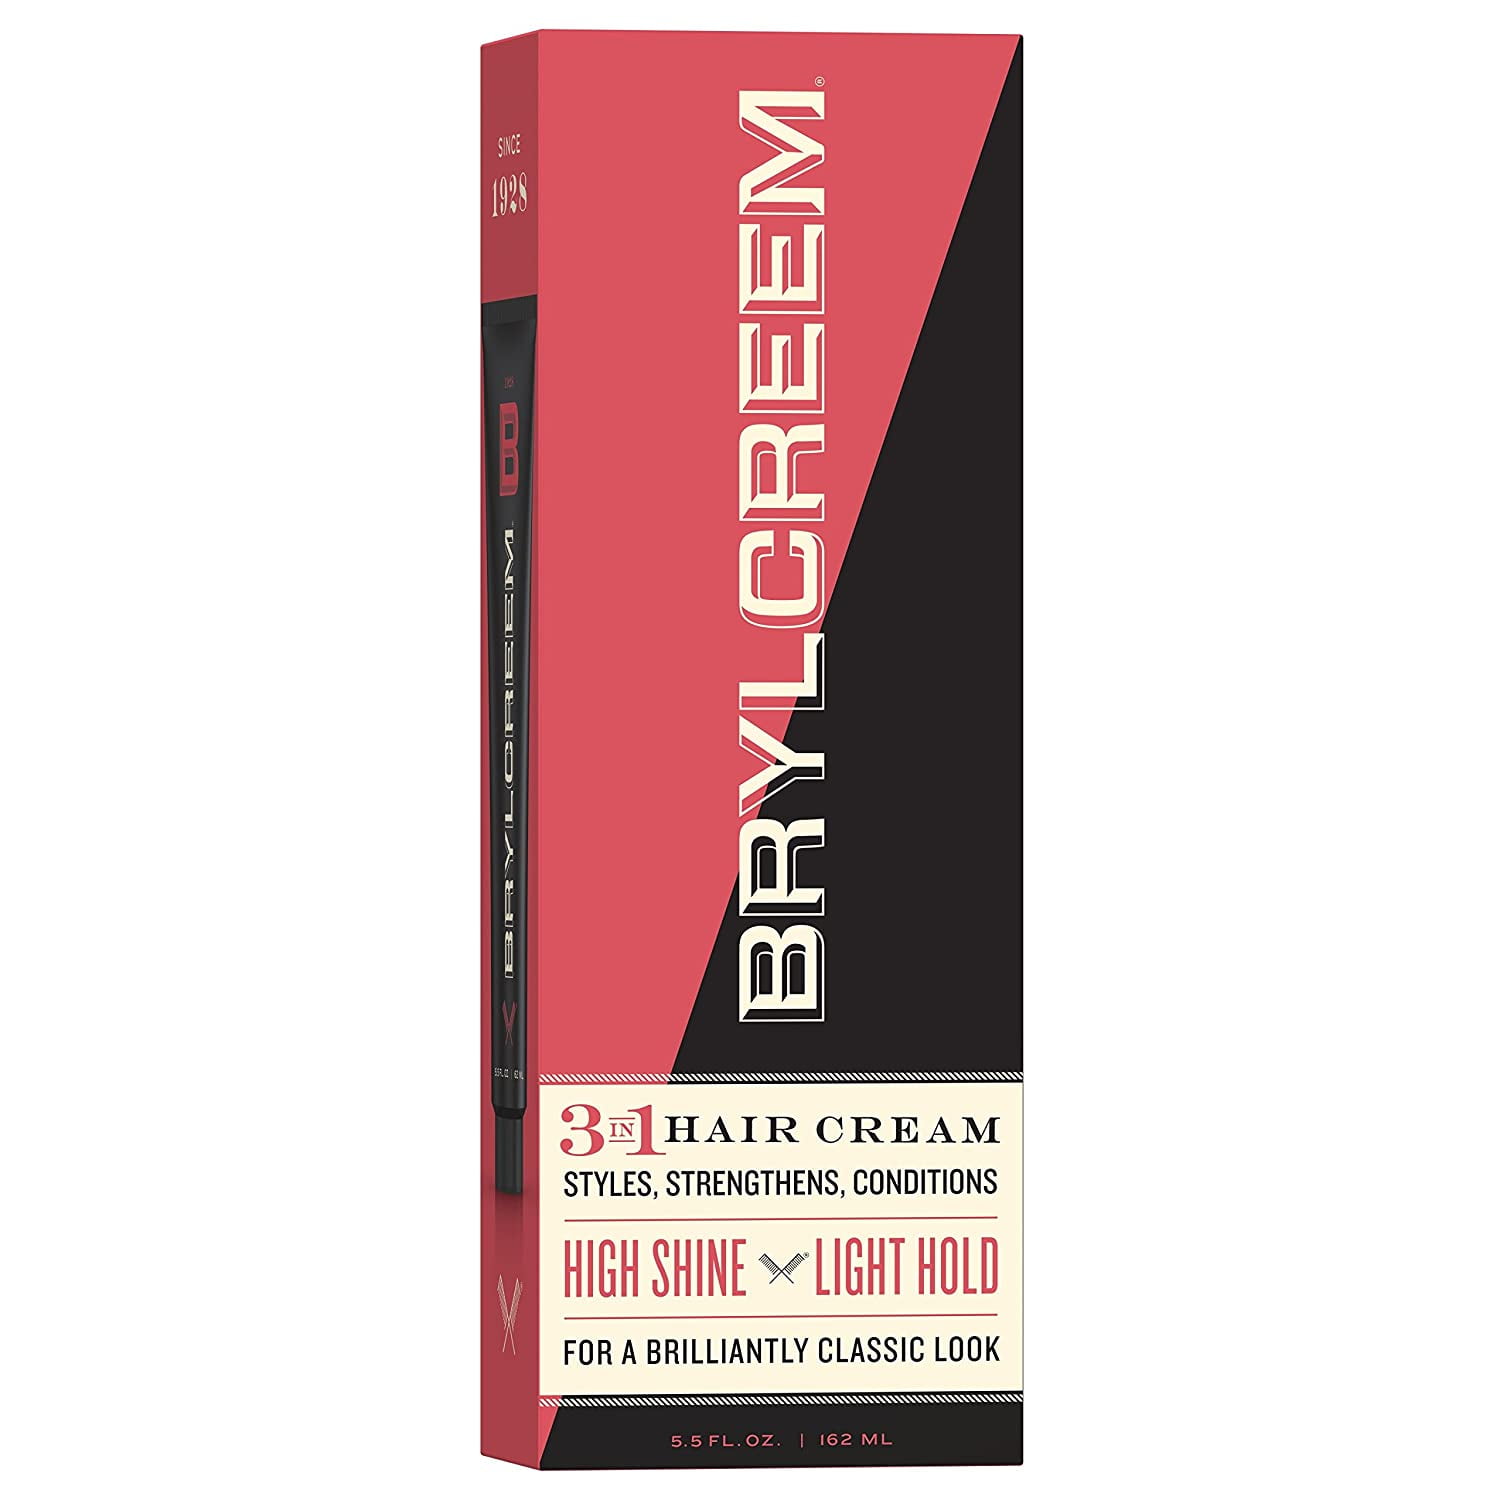 Buy Brylcreem Hairfall Protect Hair Cream 75 g Online at Best Prices in  India - JioMart.